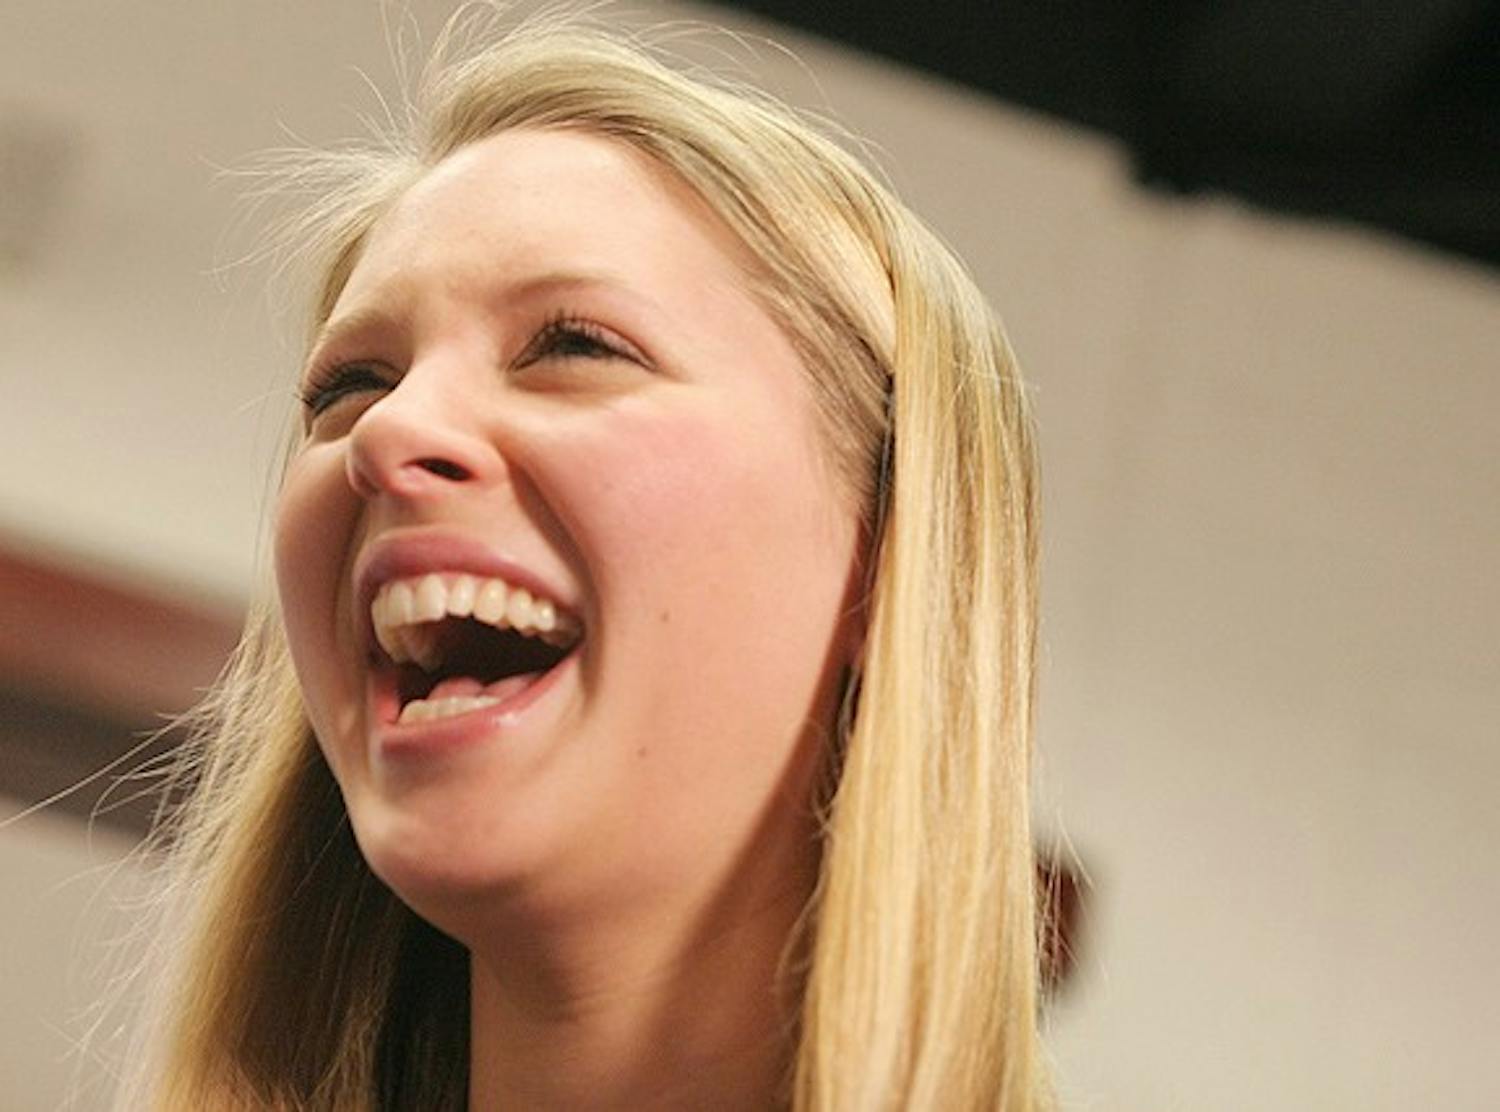 Eve Carson, the 2008 UNC Student Body President, laughs in a photo.